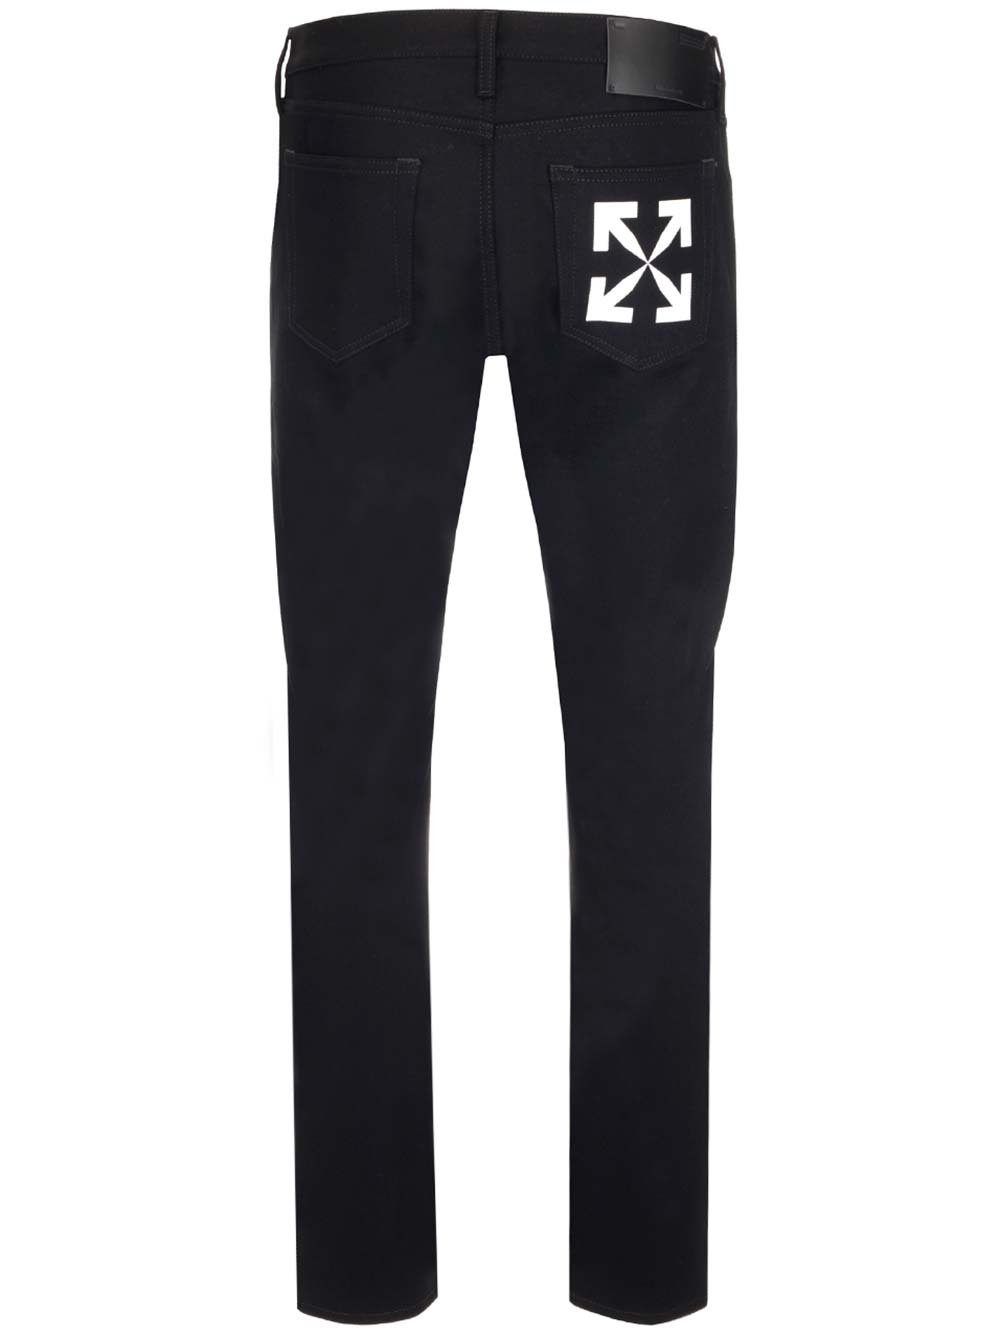 Off-White Arrows Printed Straight Leg Jeans